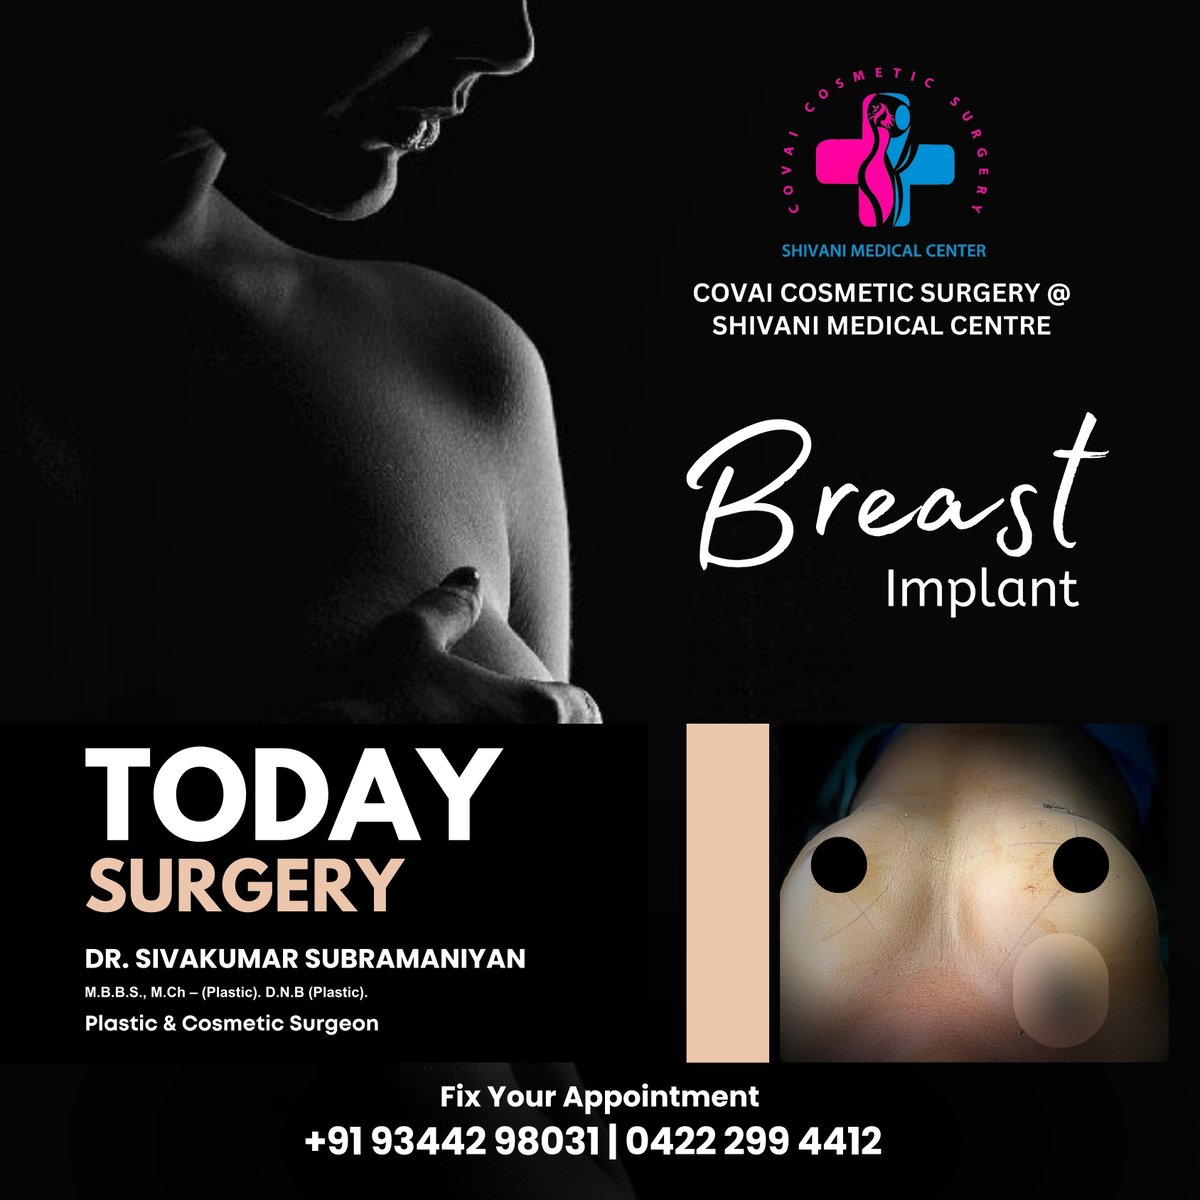 Understanding your options for breast implants can help you make an informed decision if you choose to undergo breast implant surgery.

#breastimplants #breastimplantsize #breastimplantsmiami #breastimplantstories #breastimplantsurgery #breastimplantsillness